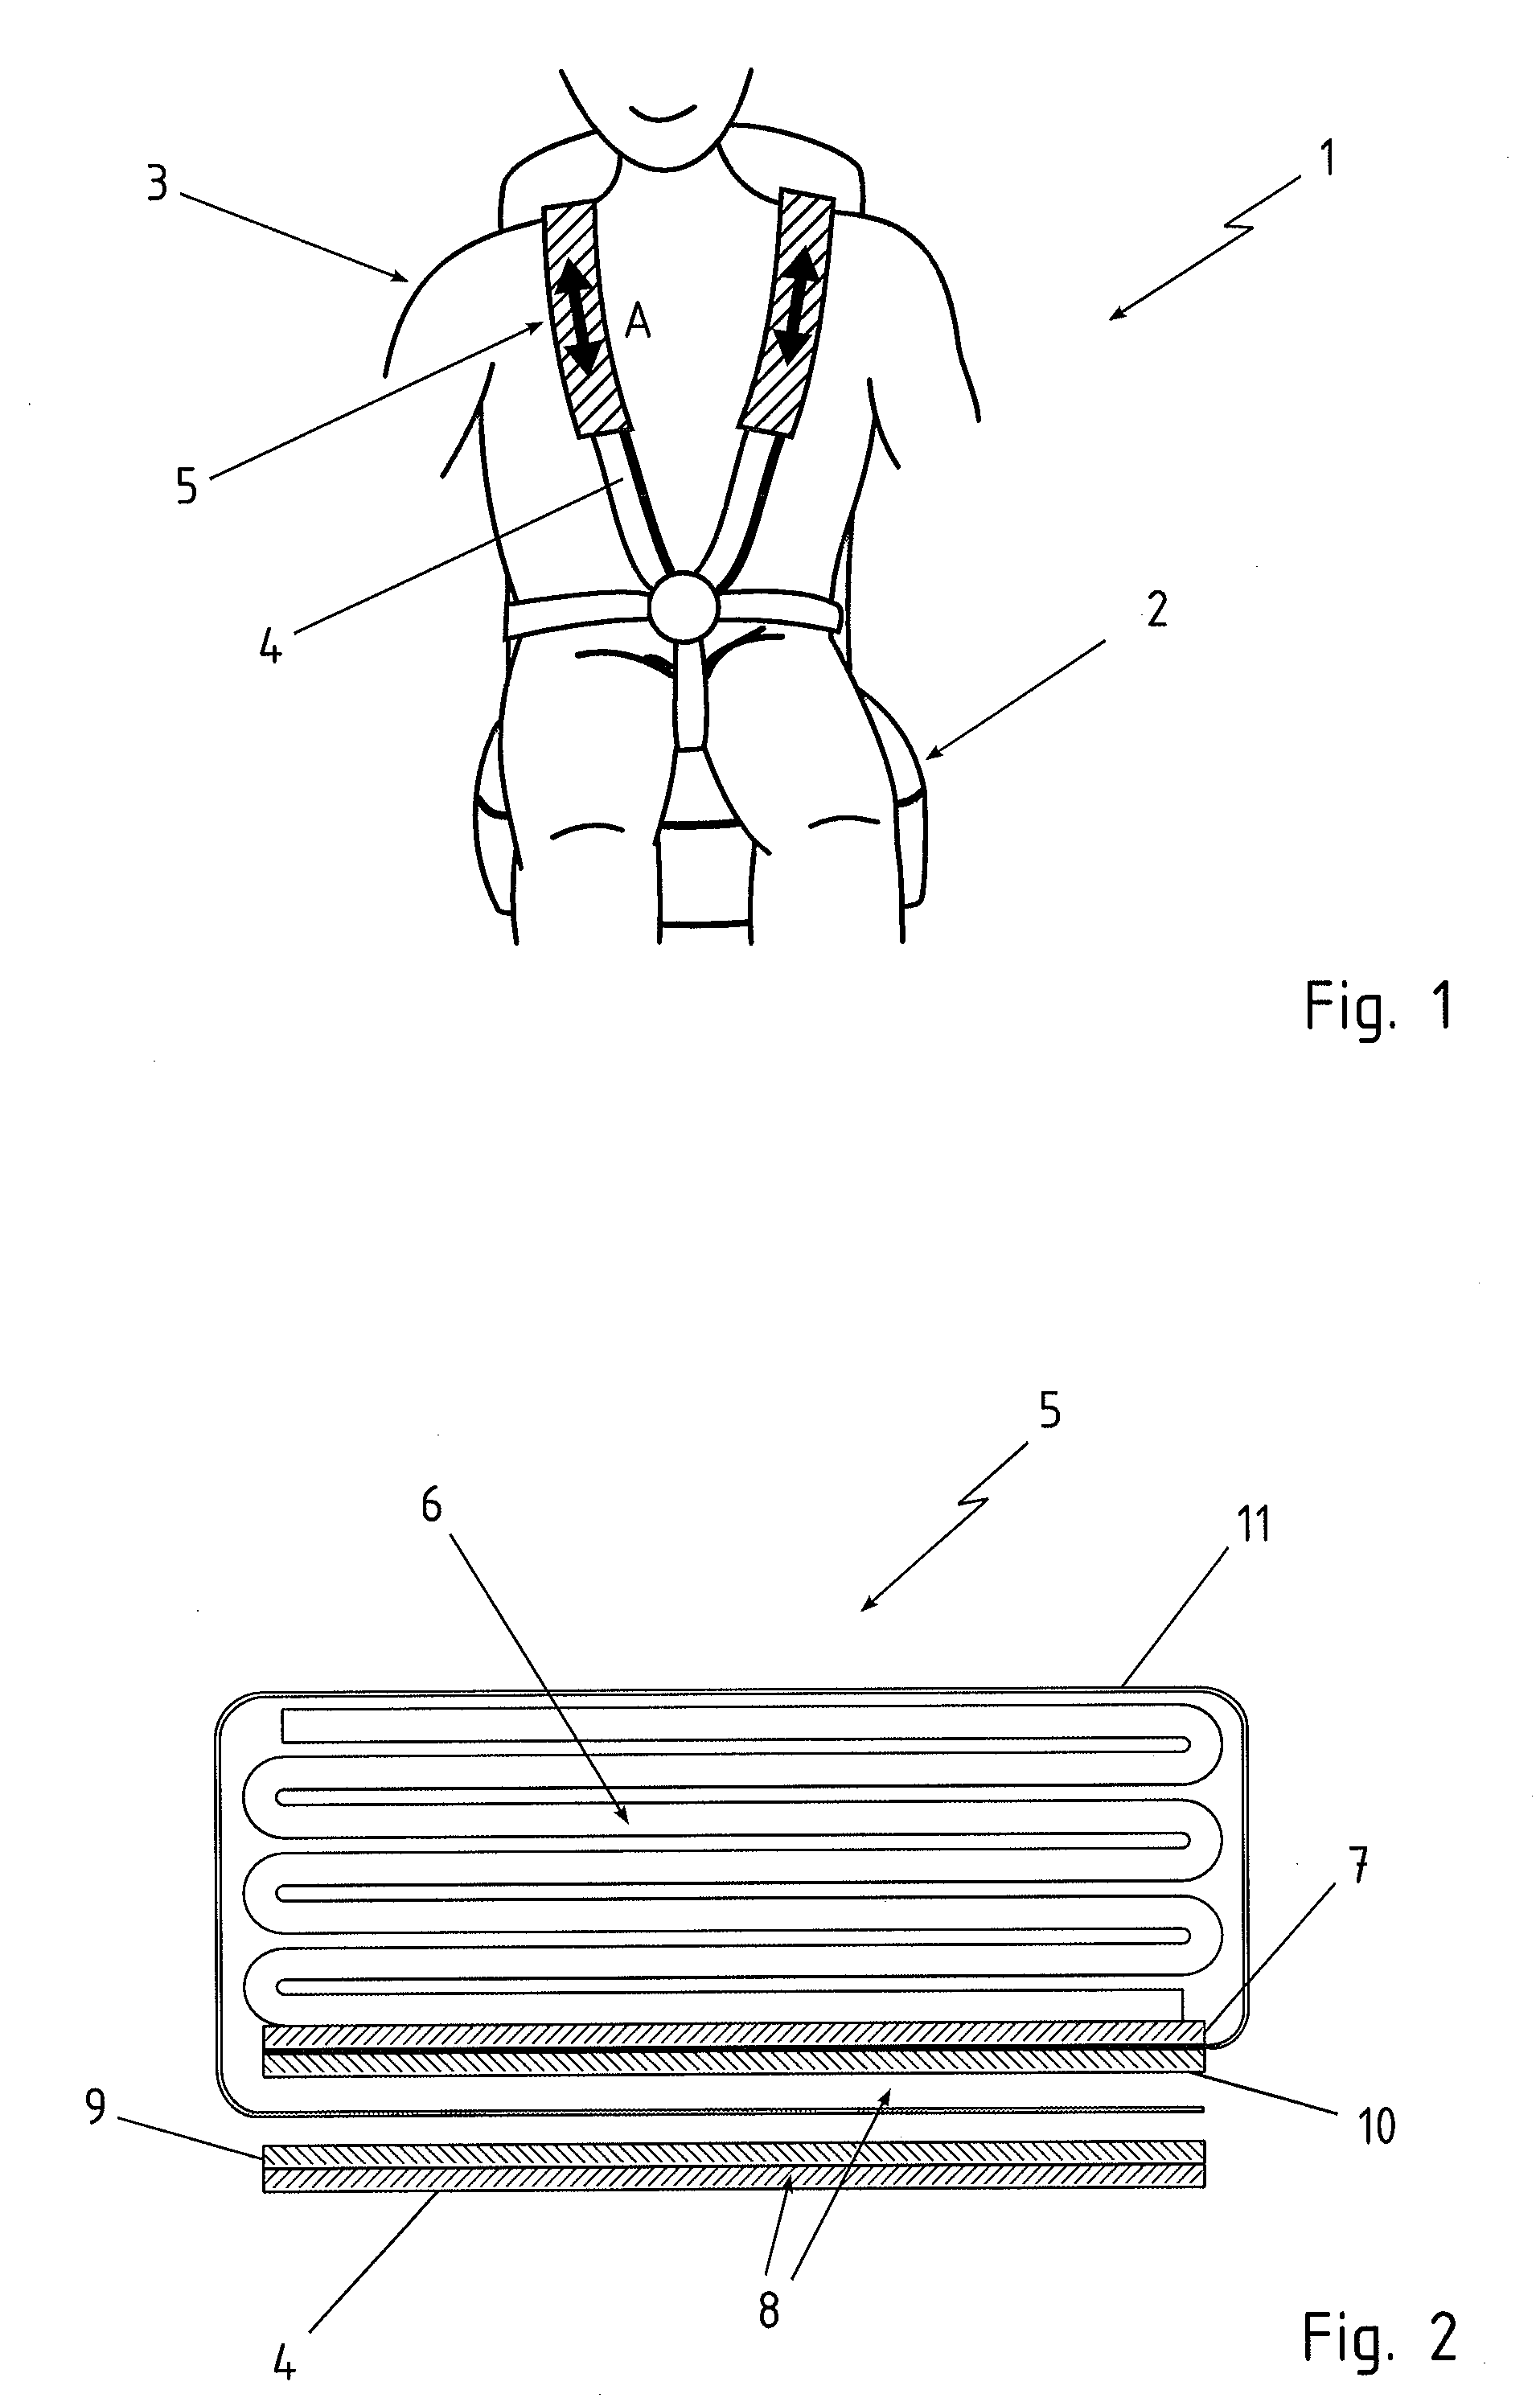 Restraint System with Adjustable Airbag